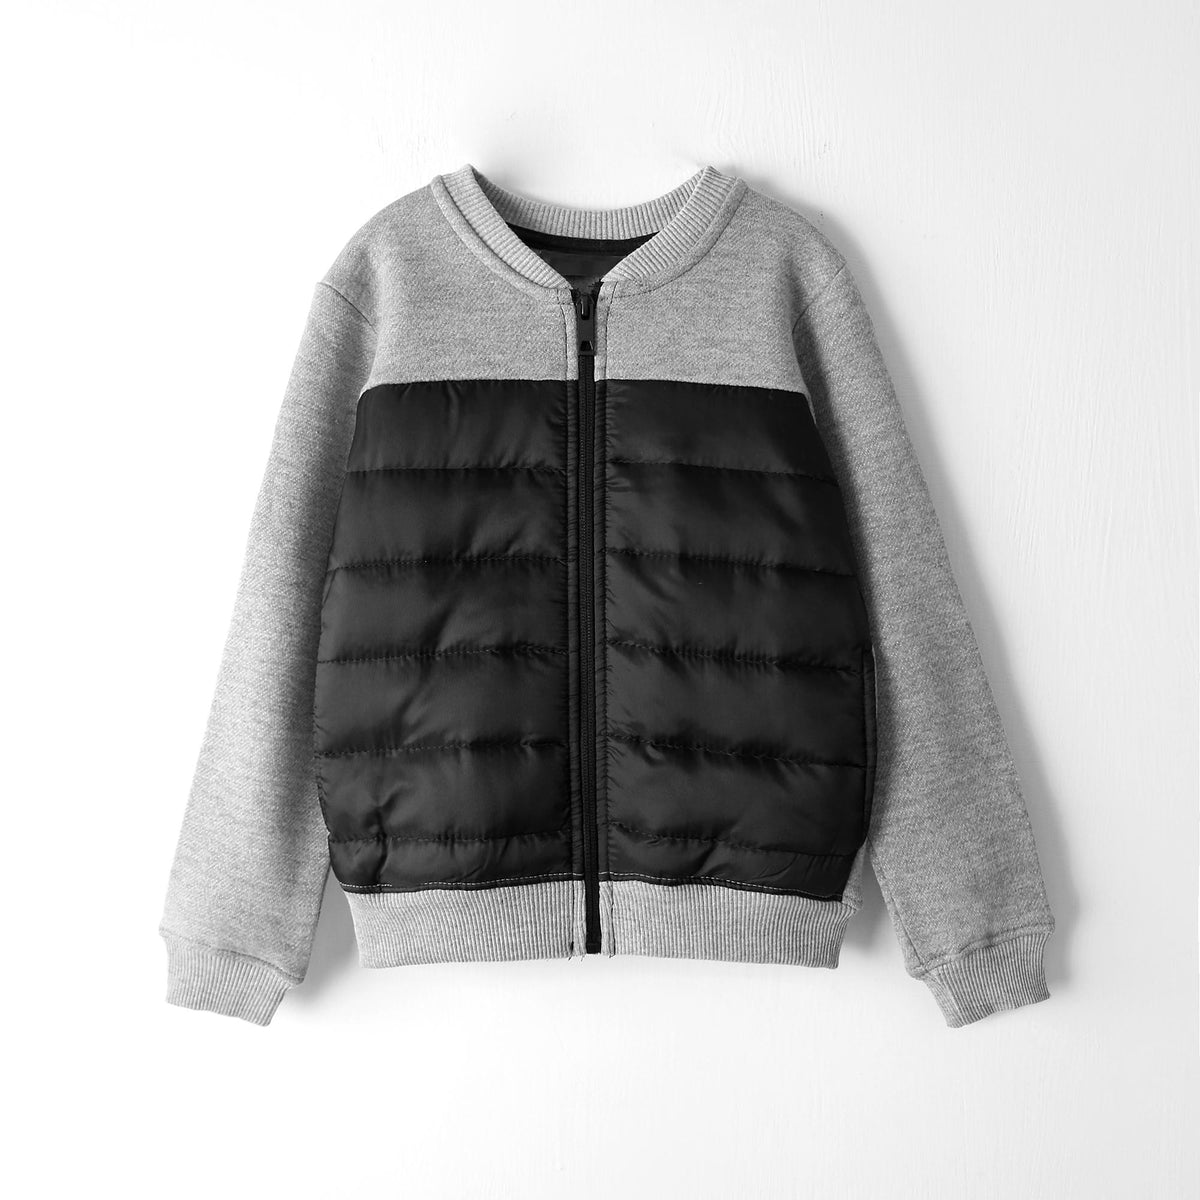 Kids Parachute Quilted Paneled Gray Fleece Jacket Minor Fault